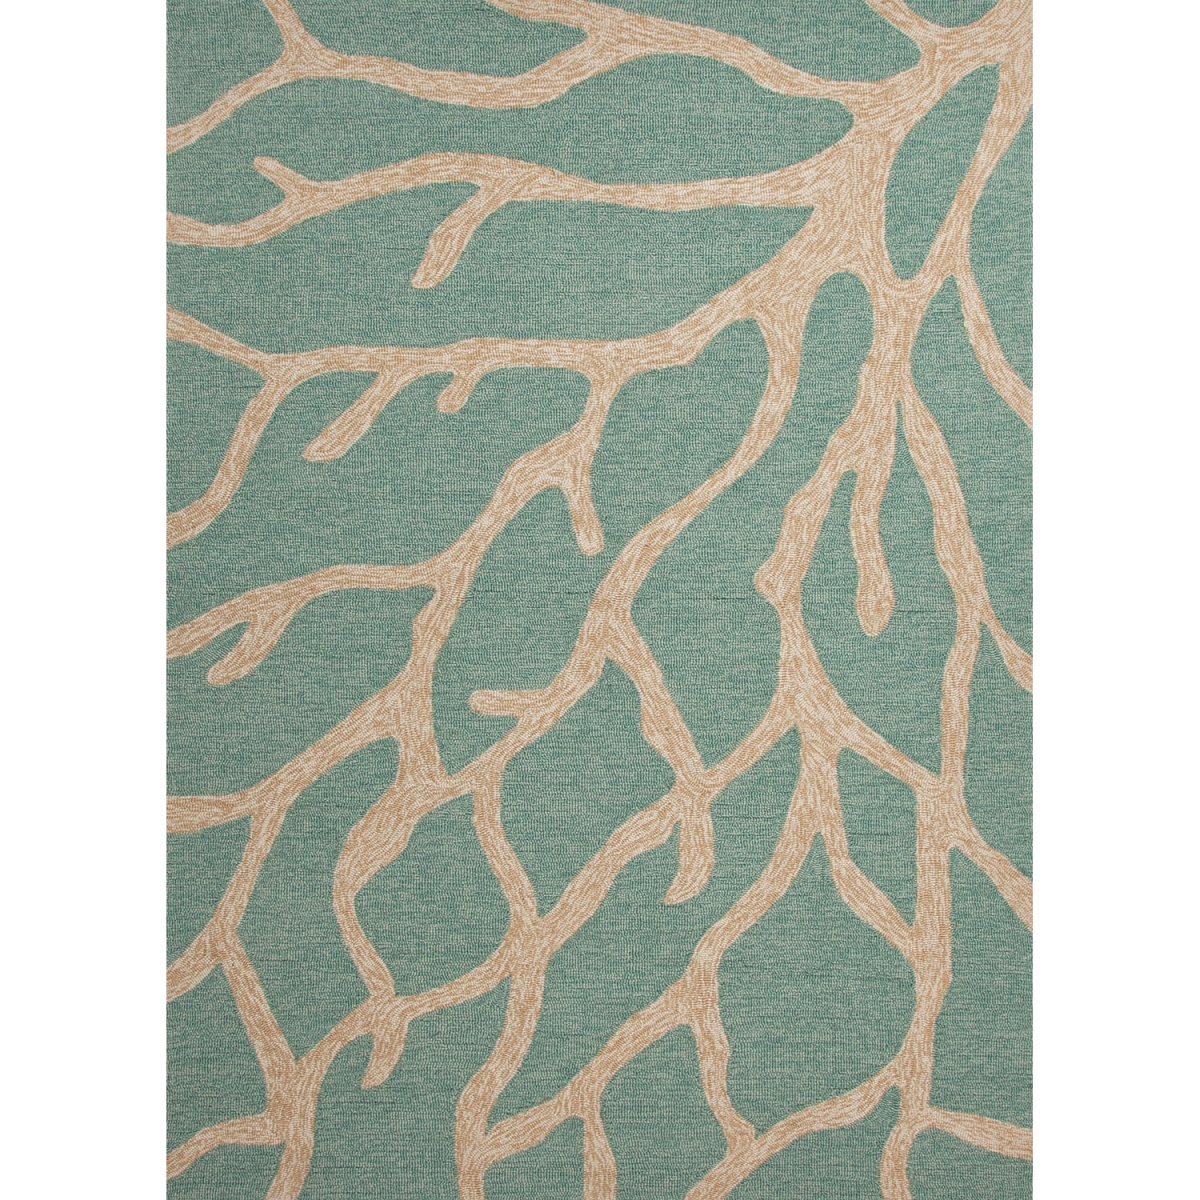 Picture of Jaipur Rugs RUG122832 Coastal Lagoon Hooked Poly Coral Design Rectangle Rug, Teal - 5 ft. x 7 ft. 6 in.